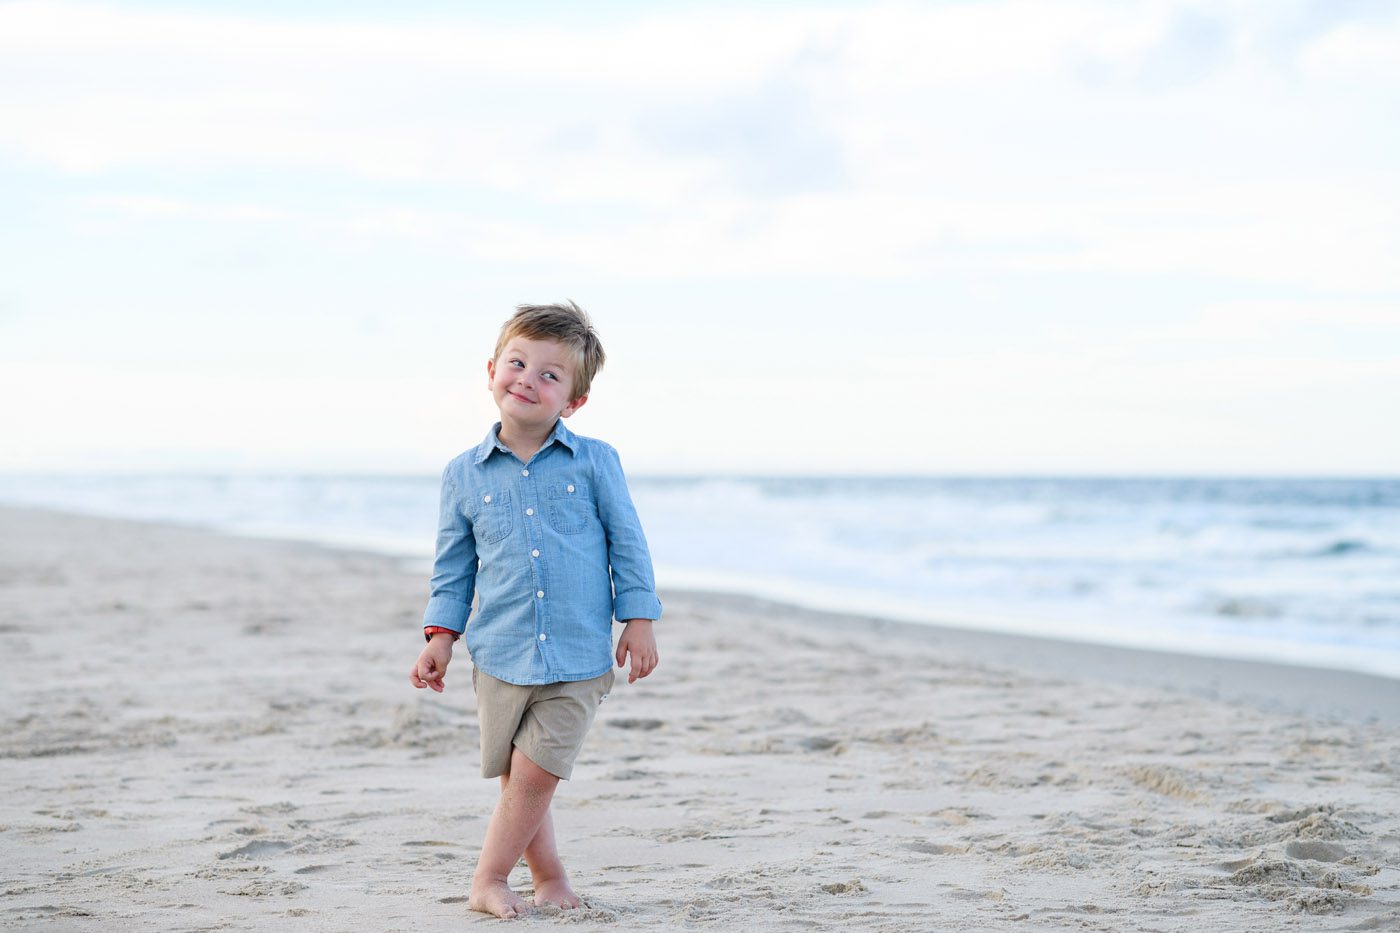 Fun Outer Banks family portraits featuring kids on the beach